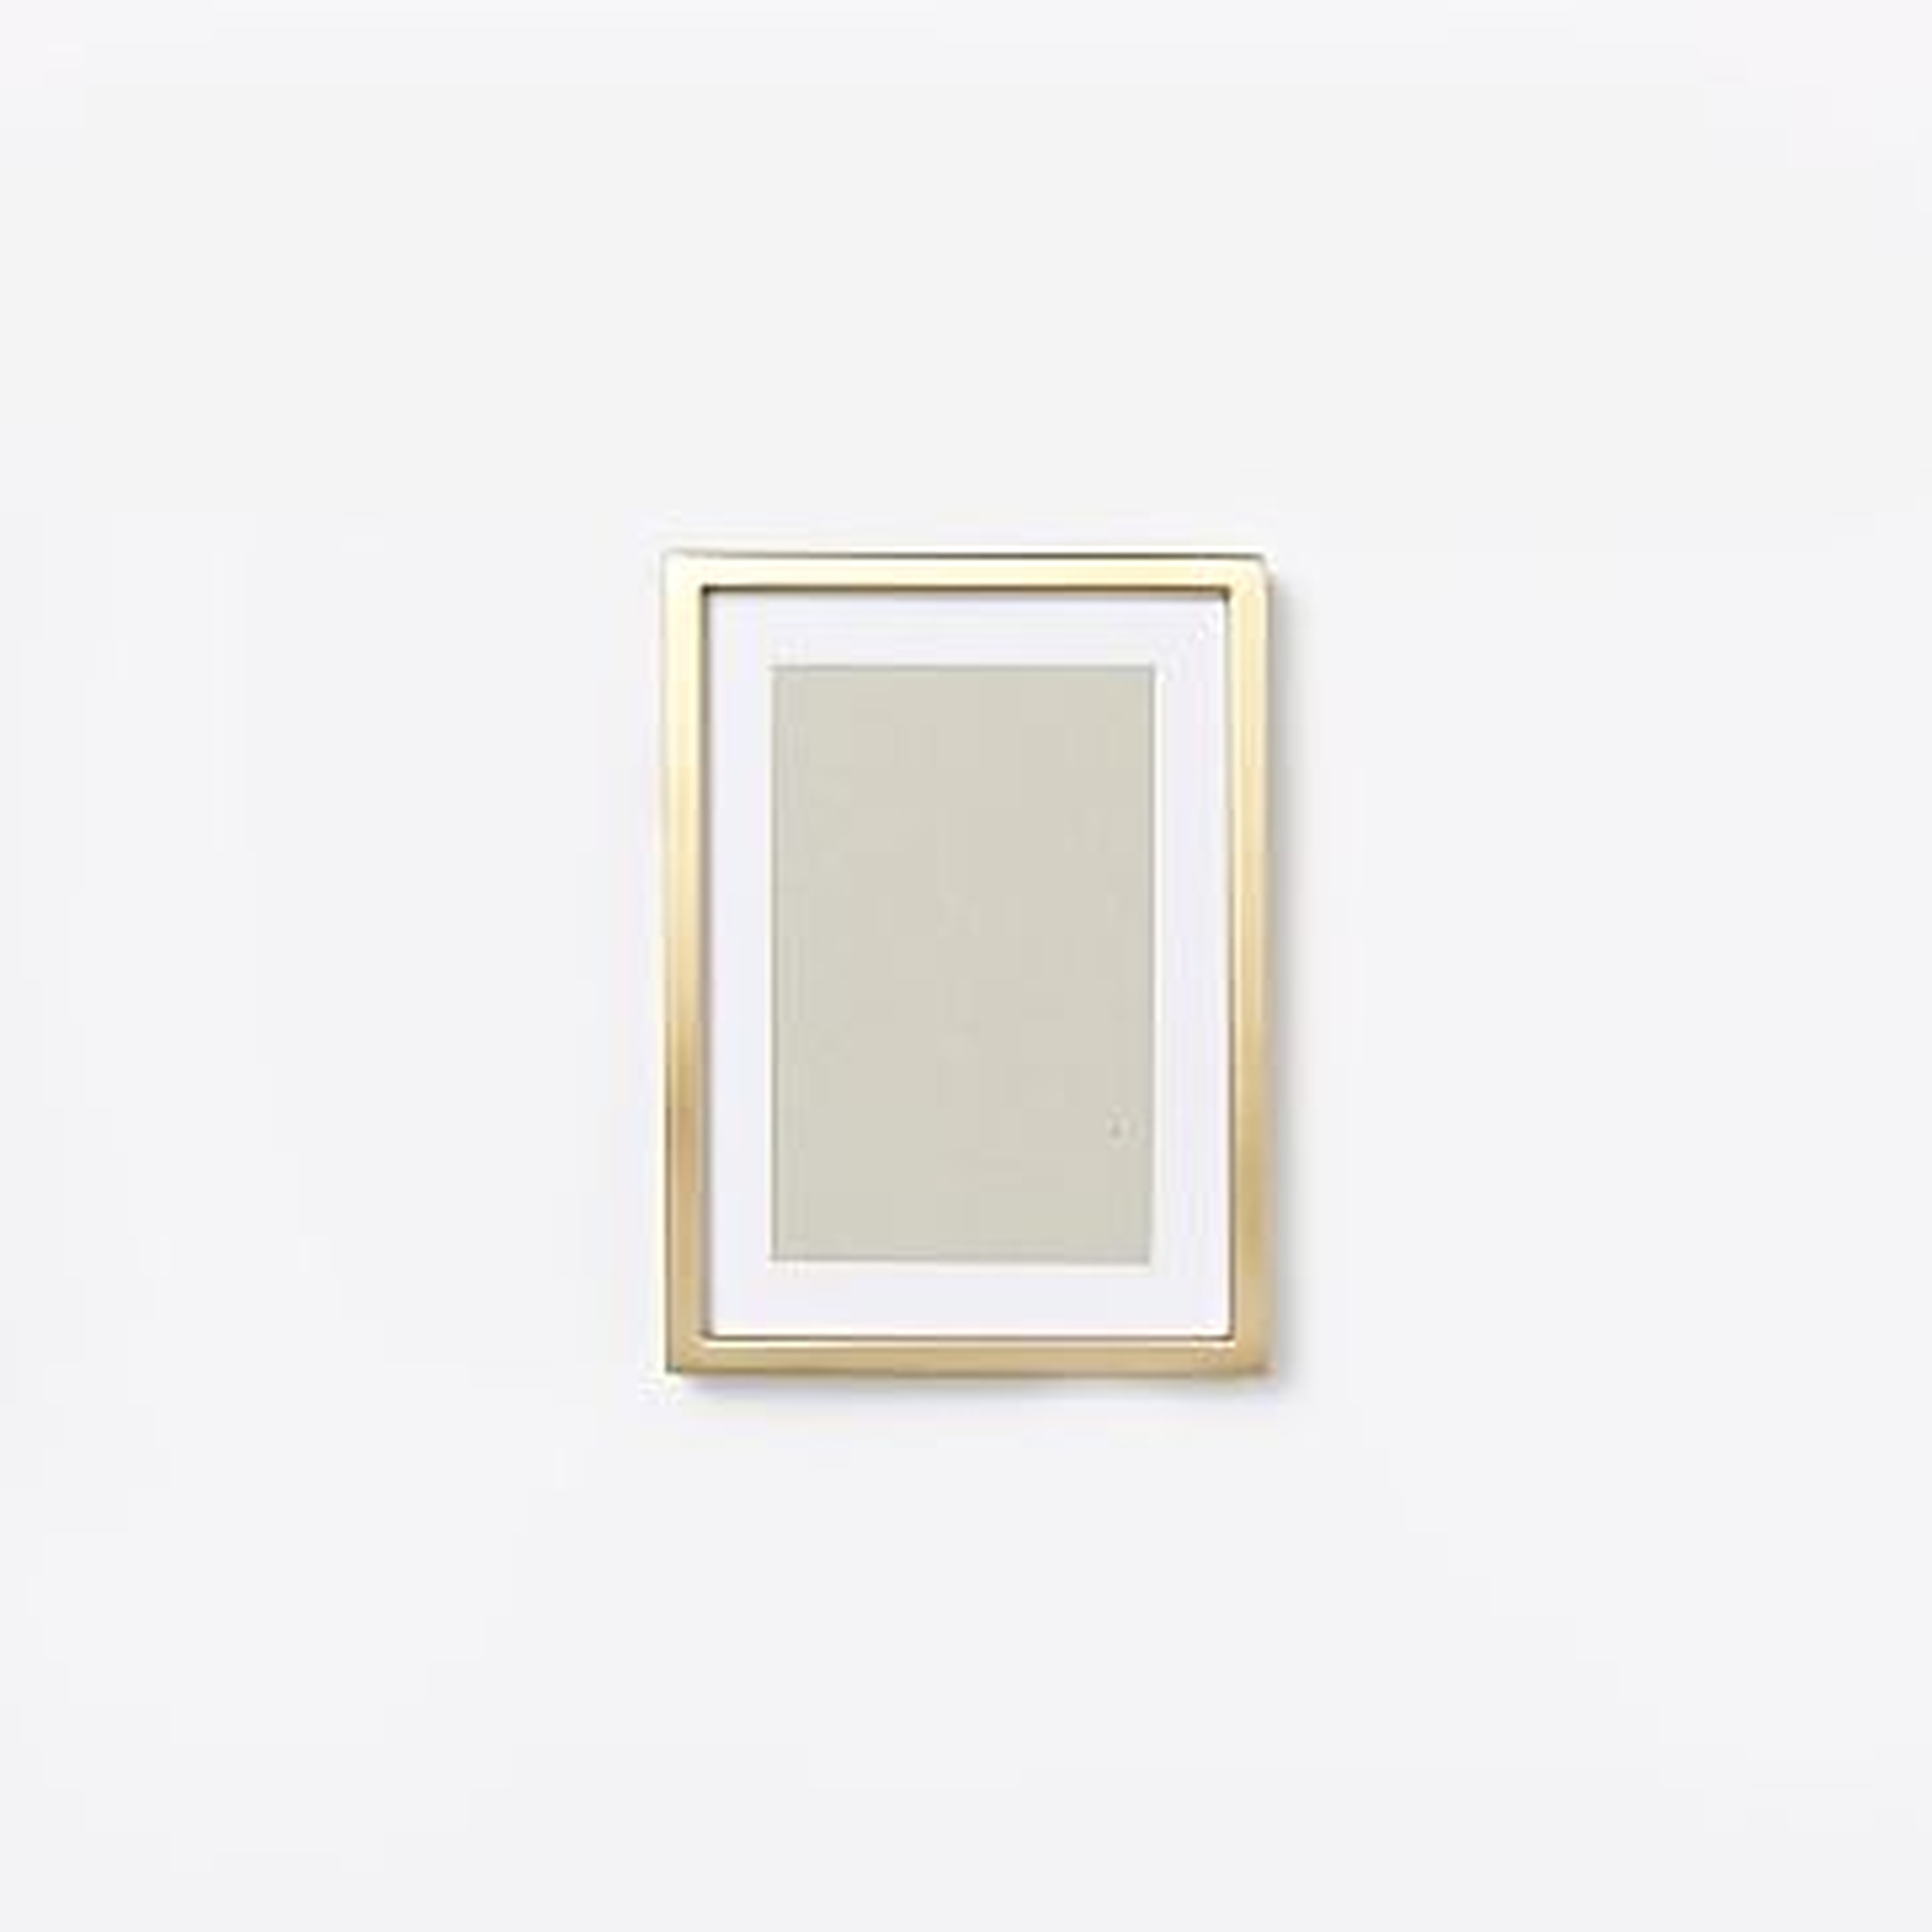 Gallery Frame, Polished Brass, 4" x 6" (5" x 7" without mat) - West Elm